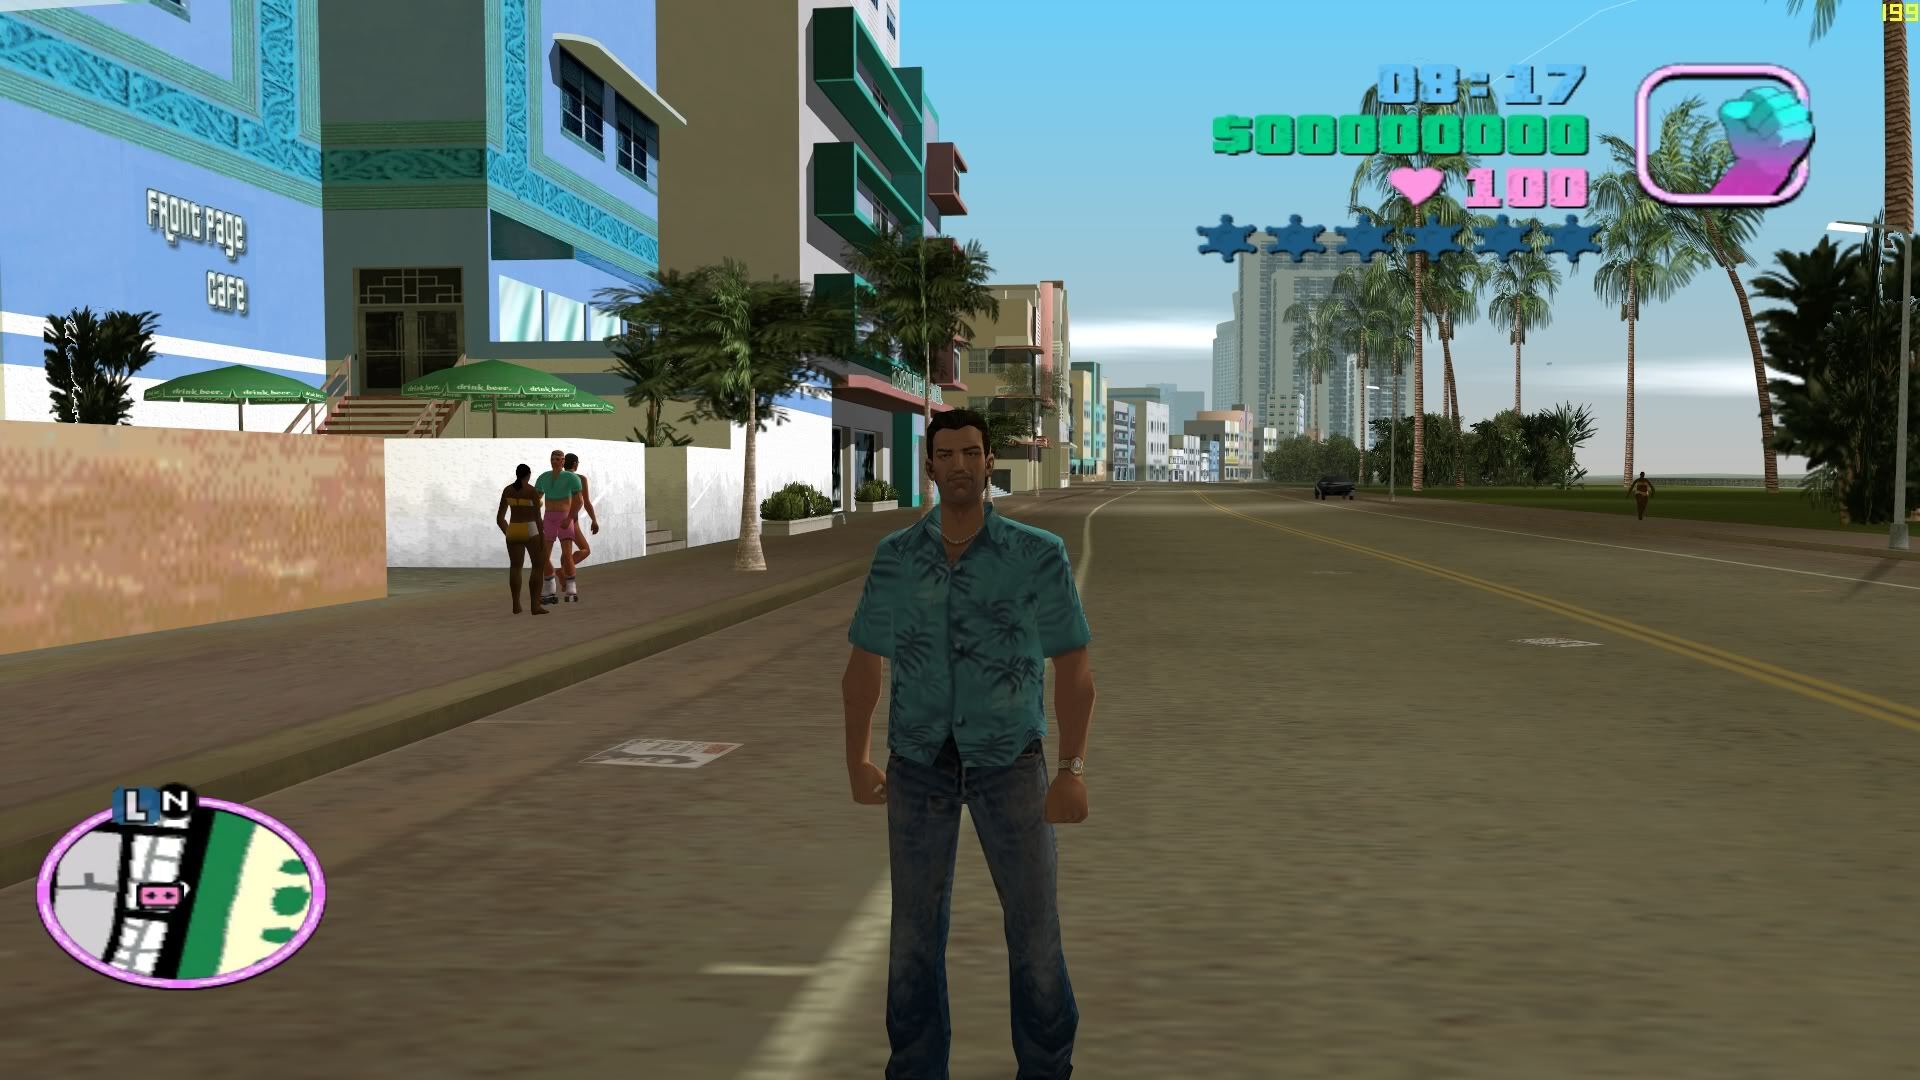 5 GTA San Andreas mods that enhance gameplay features and details